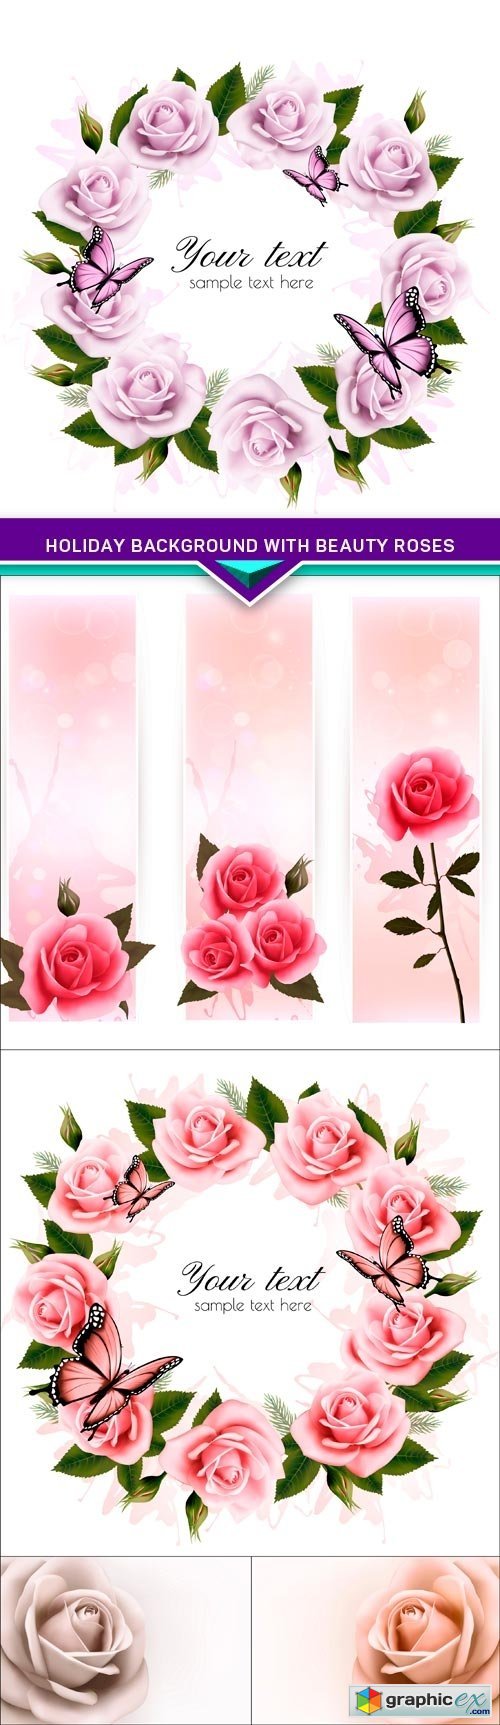 Holiday background with beauty roses 5X EPS